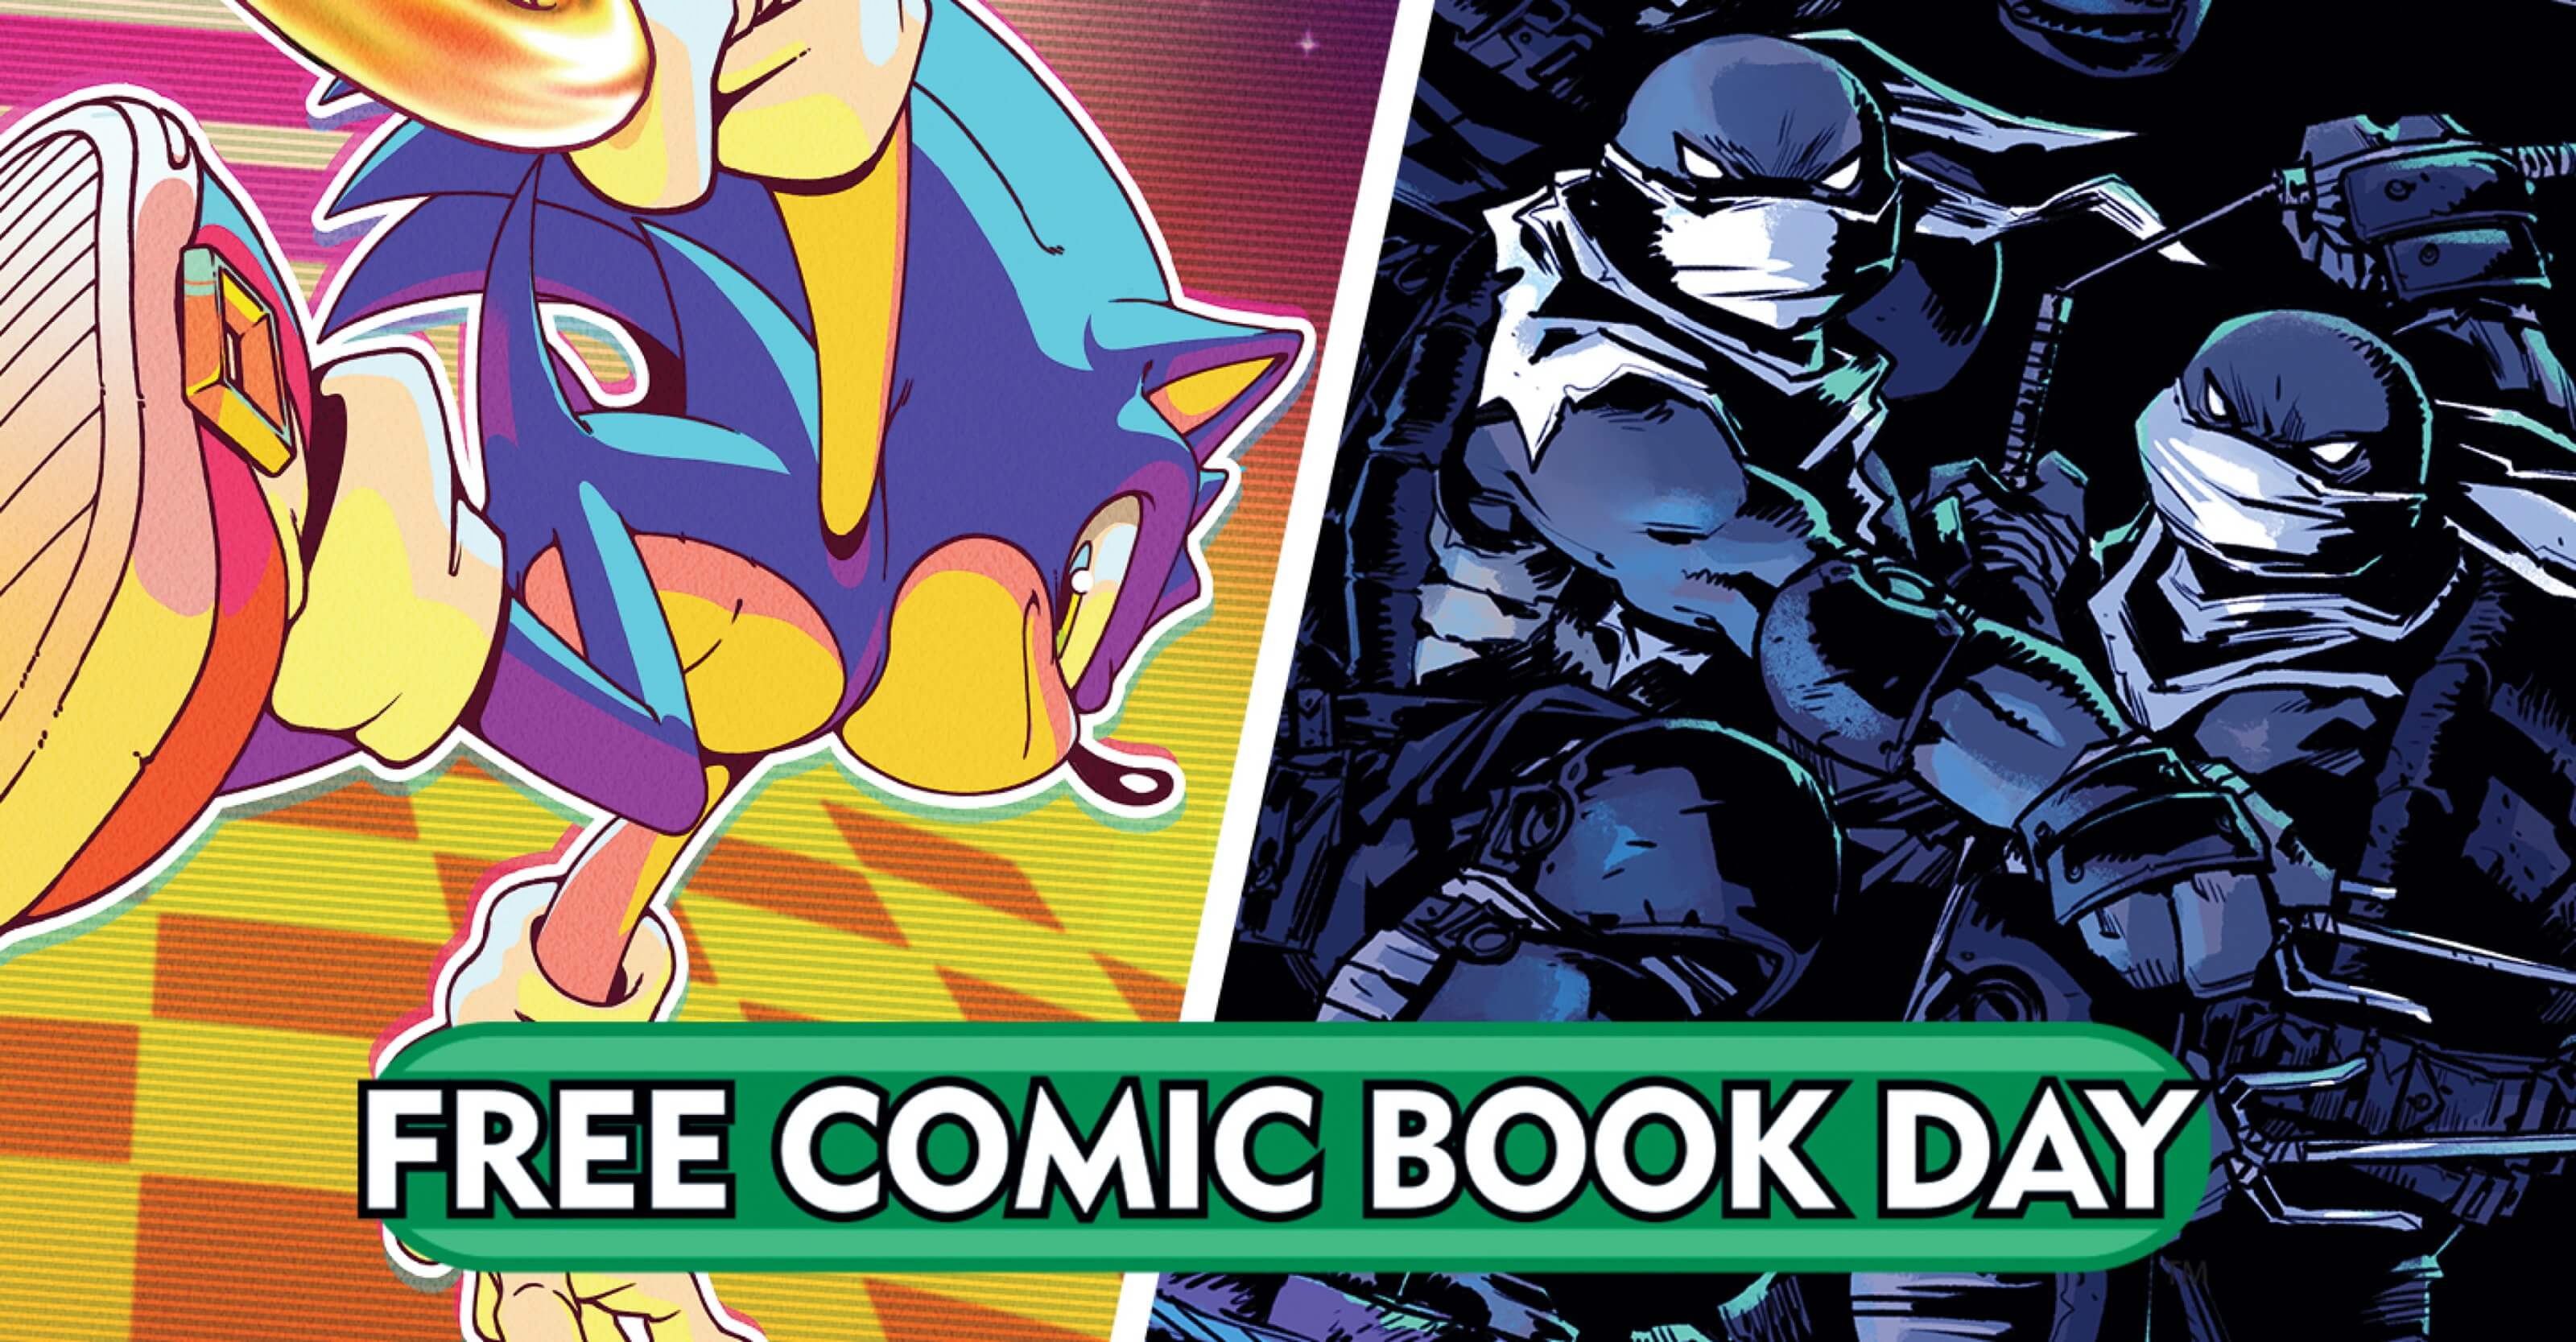 IDW Invites Teenage Mutant Ninja Turtles and Sonic The Hedgehog Fans to Celebrate Free Comic Book Day 2022